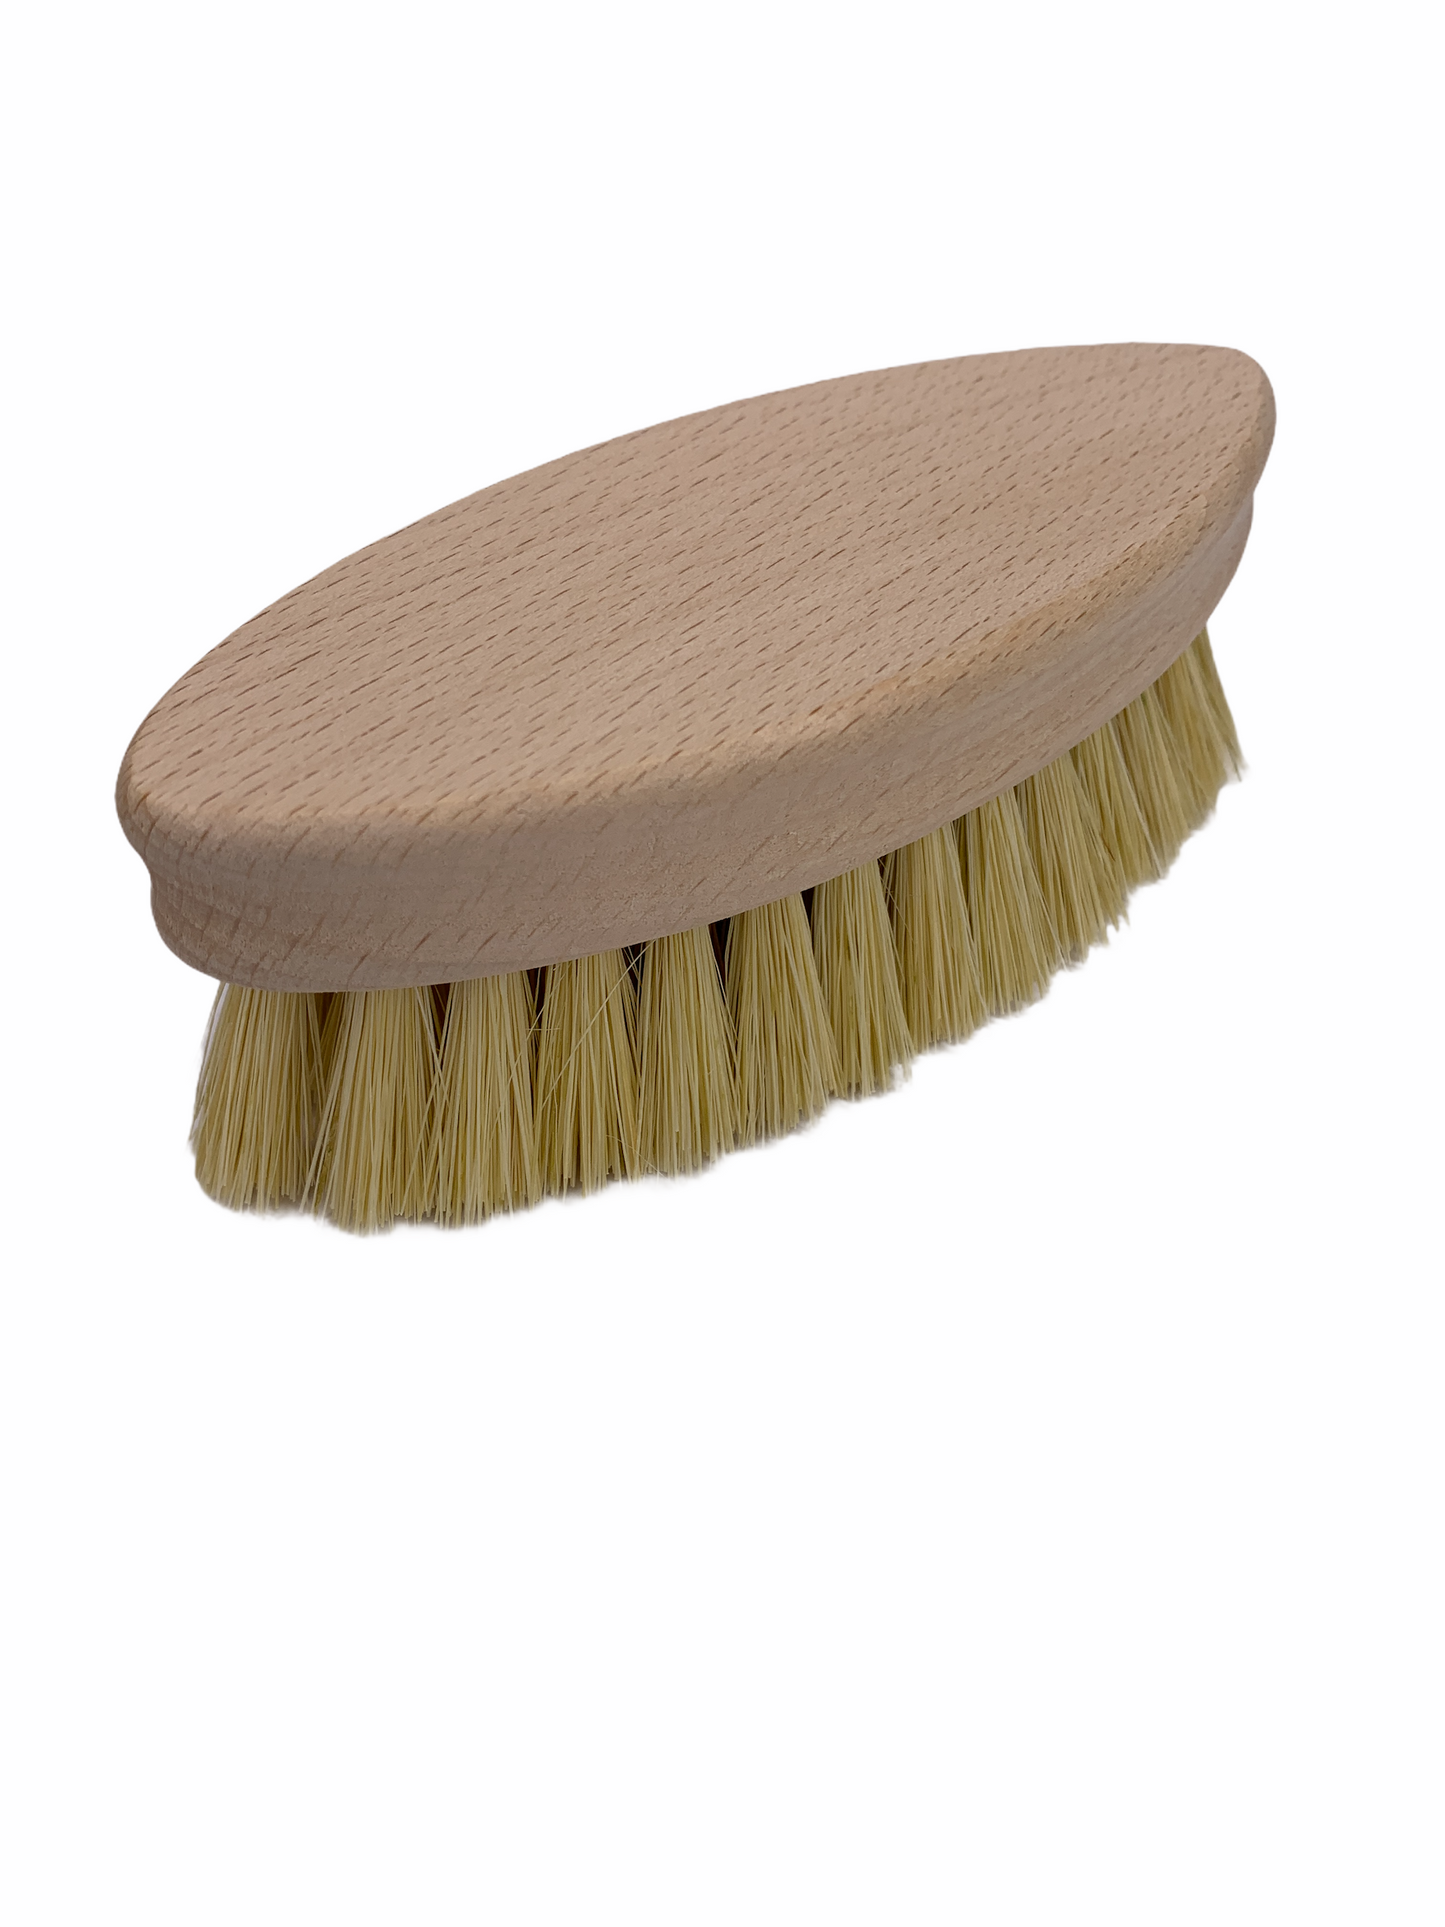 No Tox Life CASA AGAVE™ Oval Veggie or General Cleaning Brush